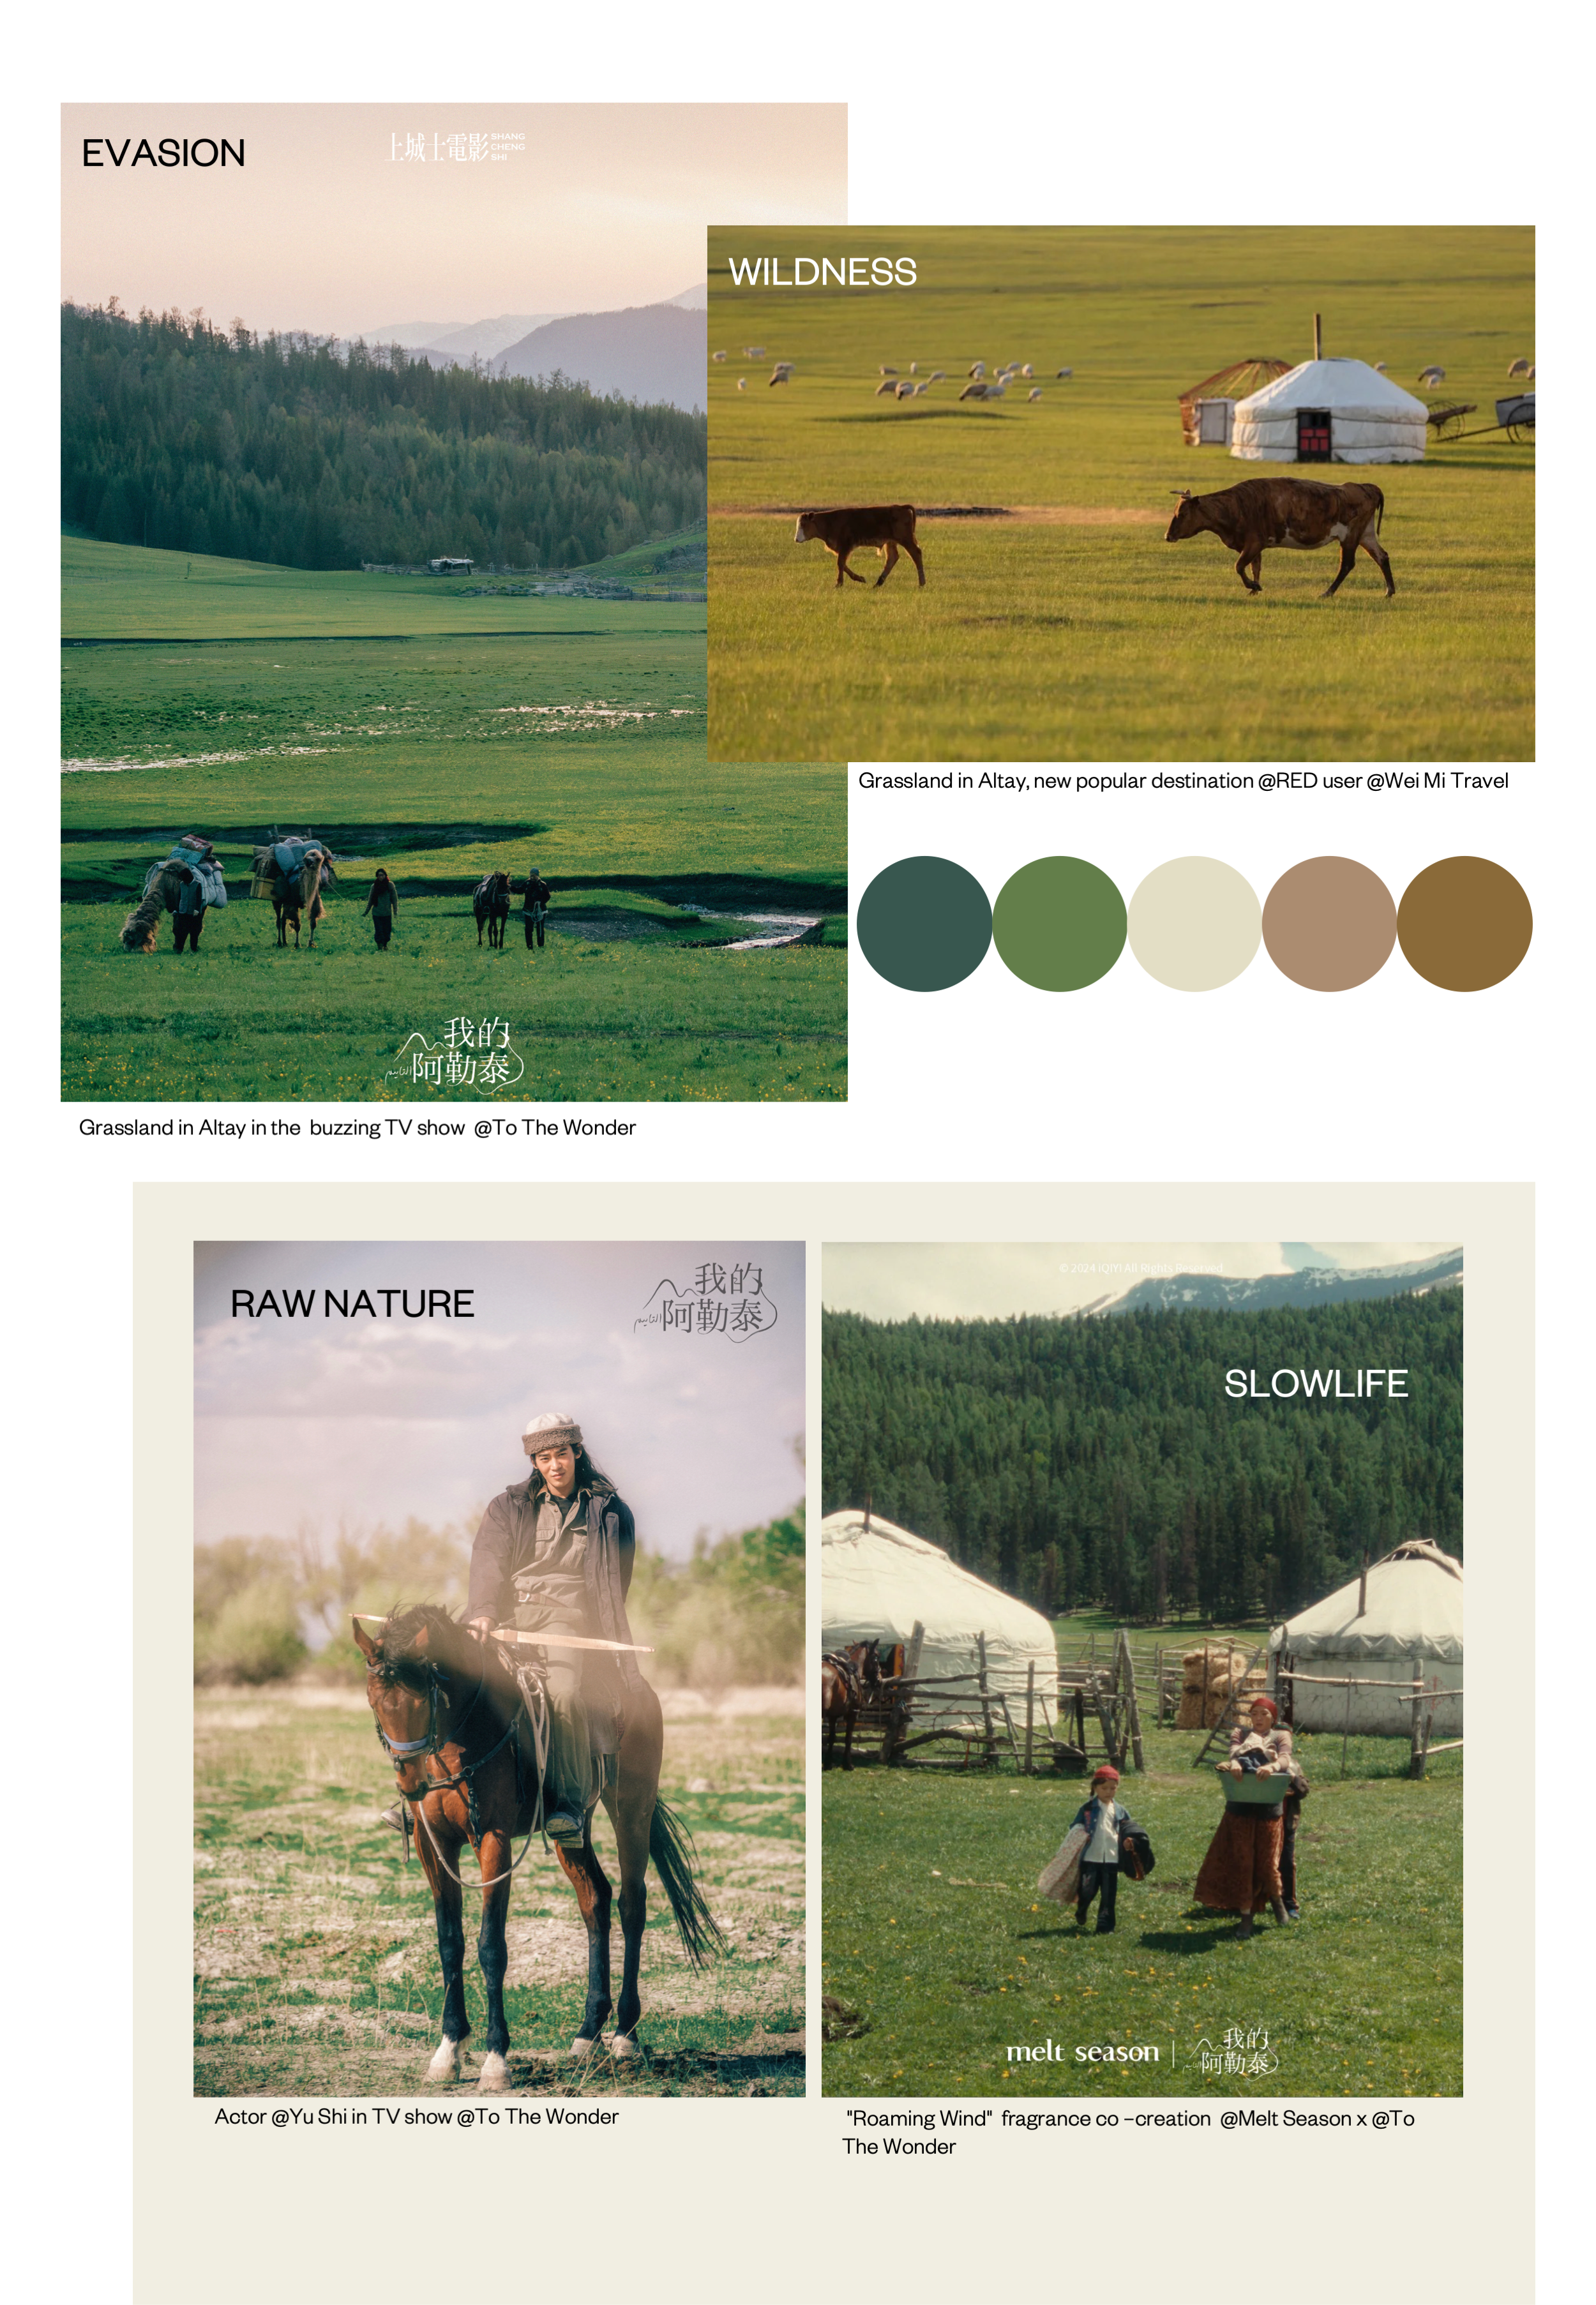 Moodboard created by The Chinese Pulse to visually explain China's 'Ethnic nomadism' style. Image: The Chinese Pulse